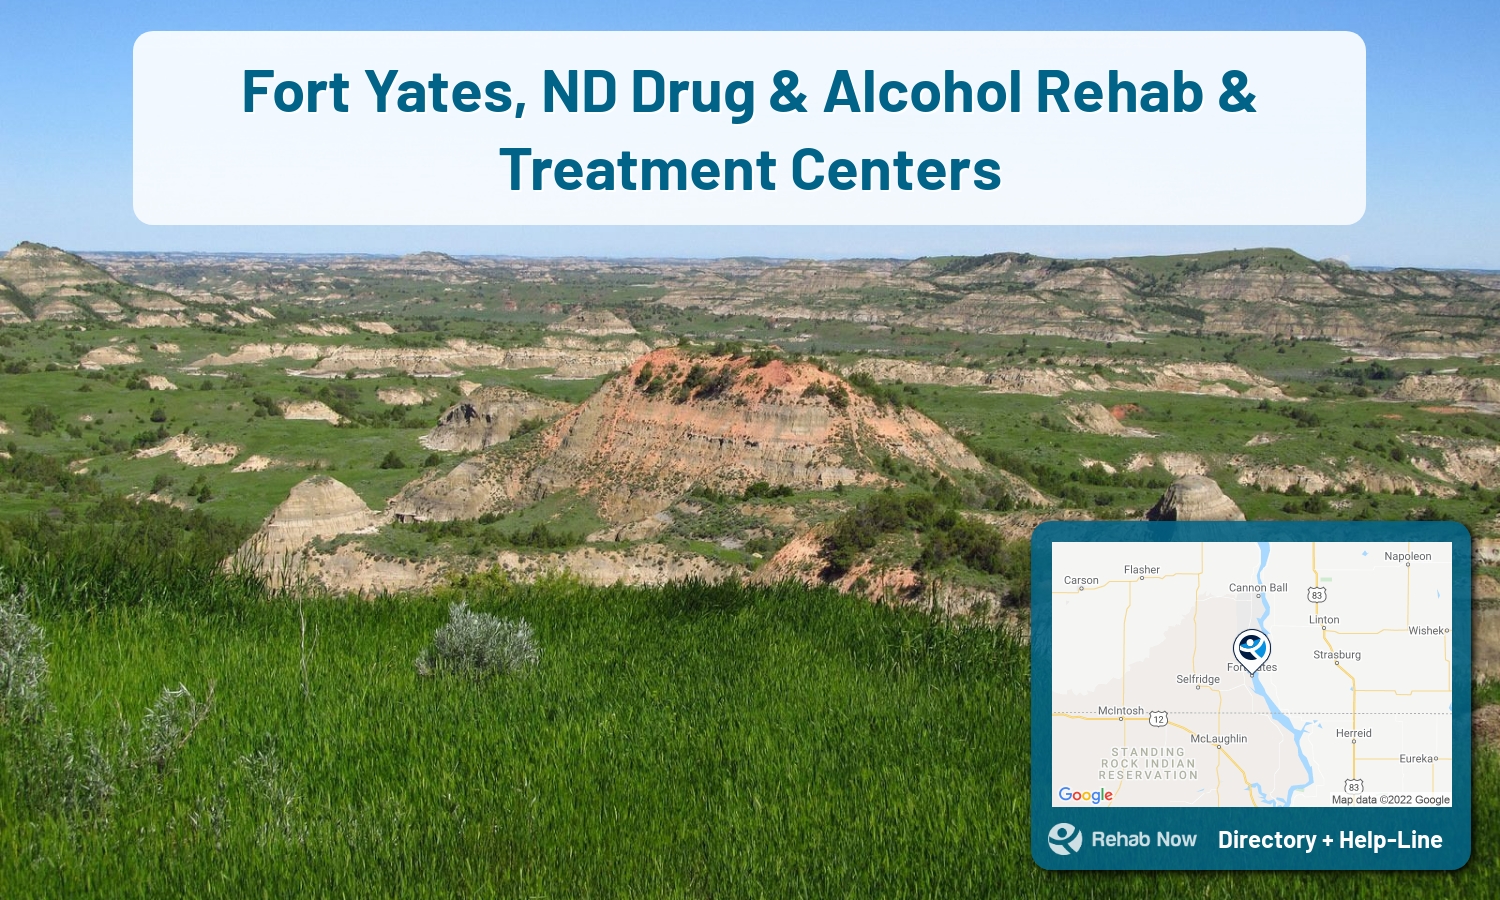 Fort Yates, ND Treatment Centers. Find drug rehab in Fort Yates, North Dakota, or detox and treatment programs. Get the right help now!